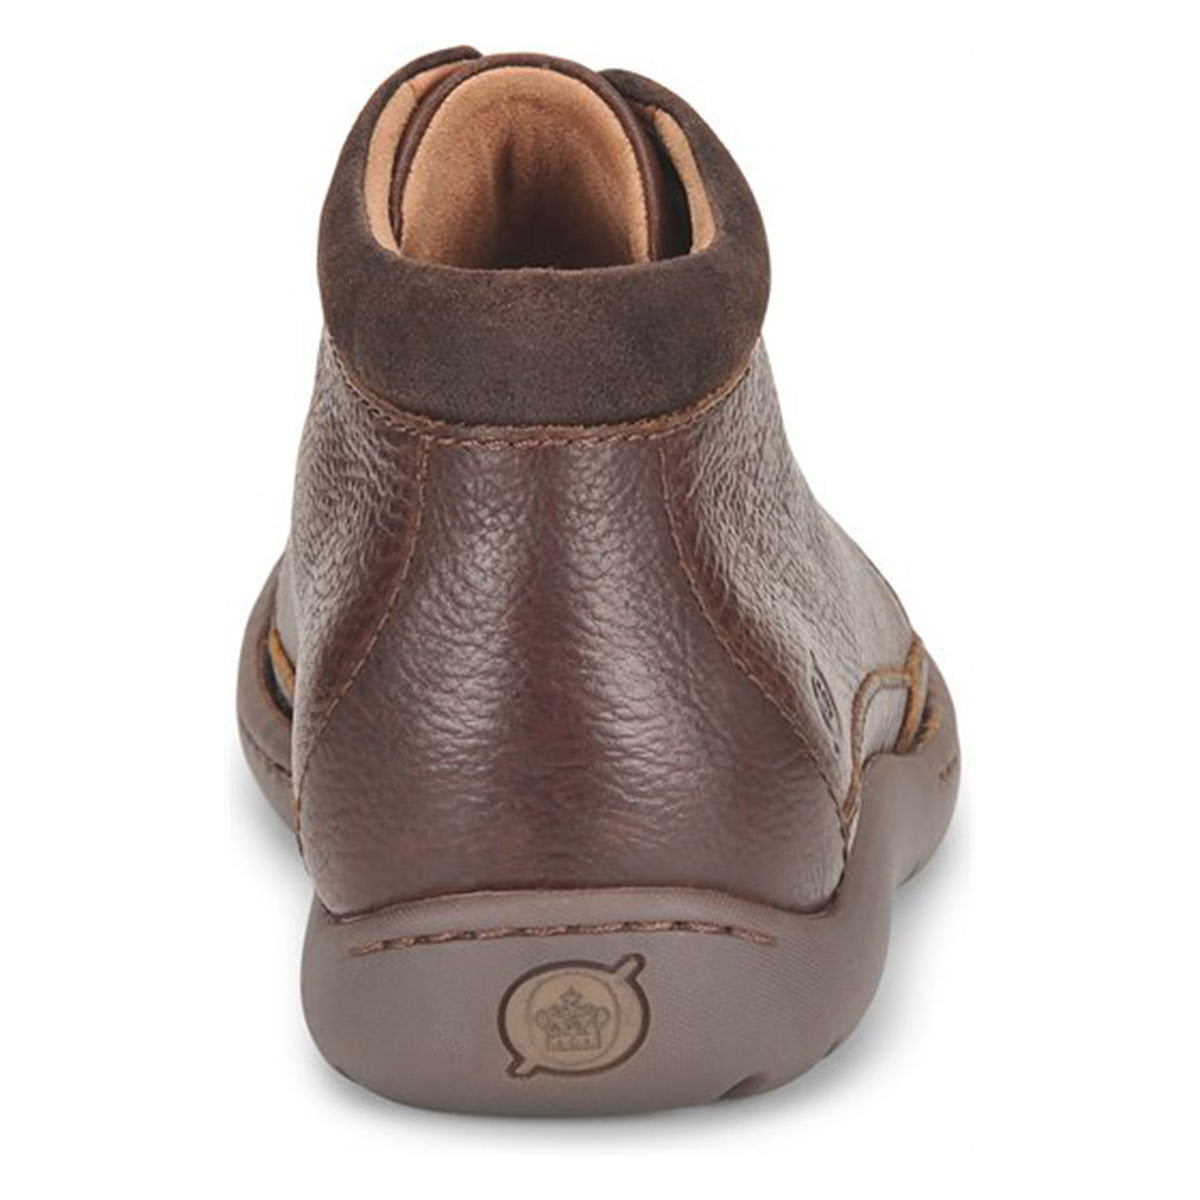 Brown leather upper ankle boot viewed from the back with a hiker-inspired design. 
BORN NIGEL BOOT DARK BROWN - MENS by Born